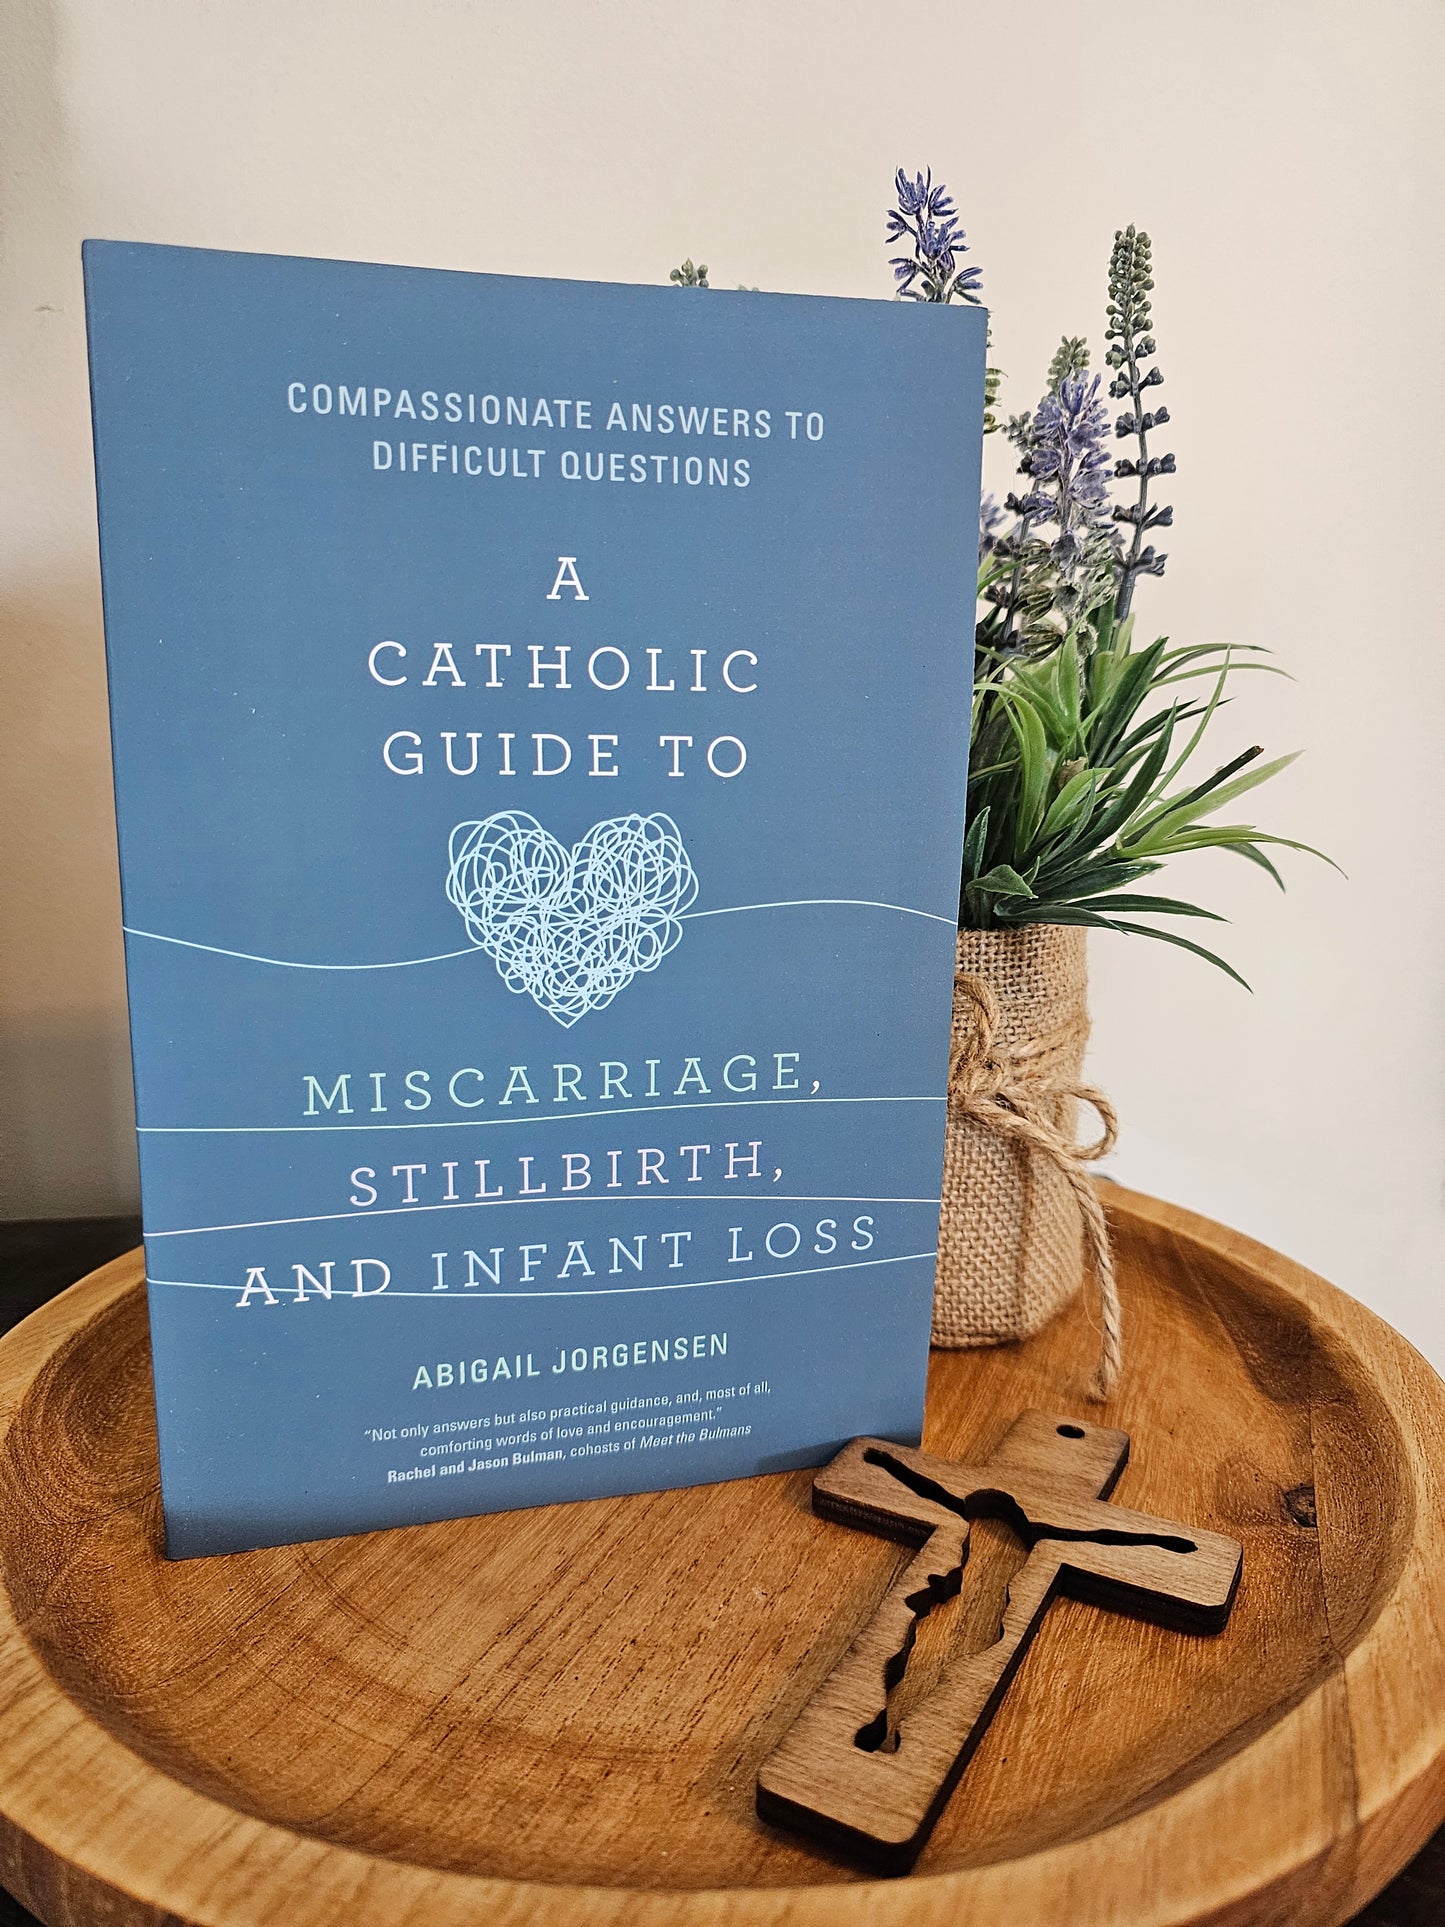 A Catholic Guide to Miscarriage, Stillbirth and Infant Loss